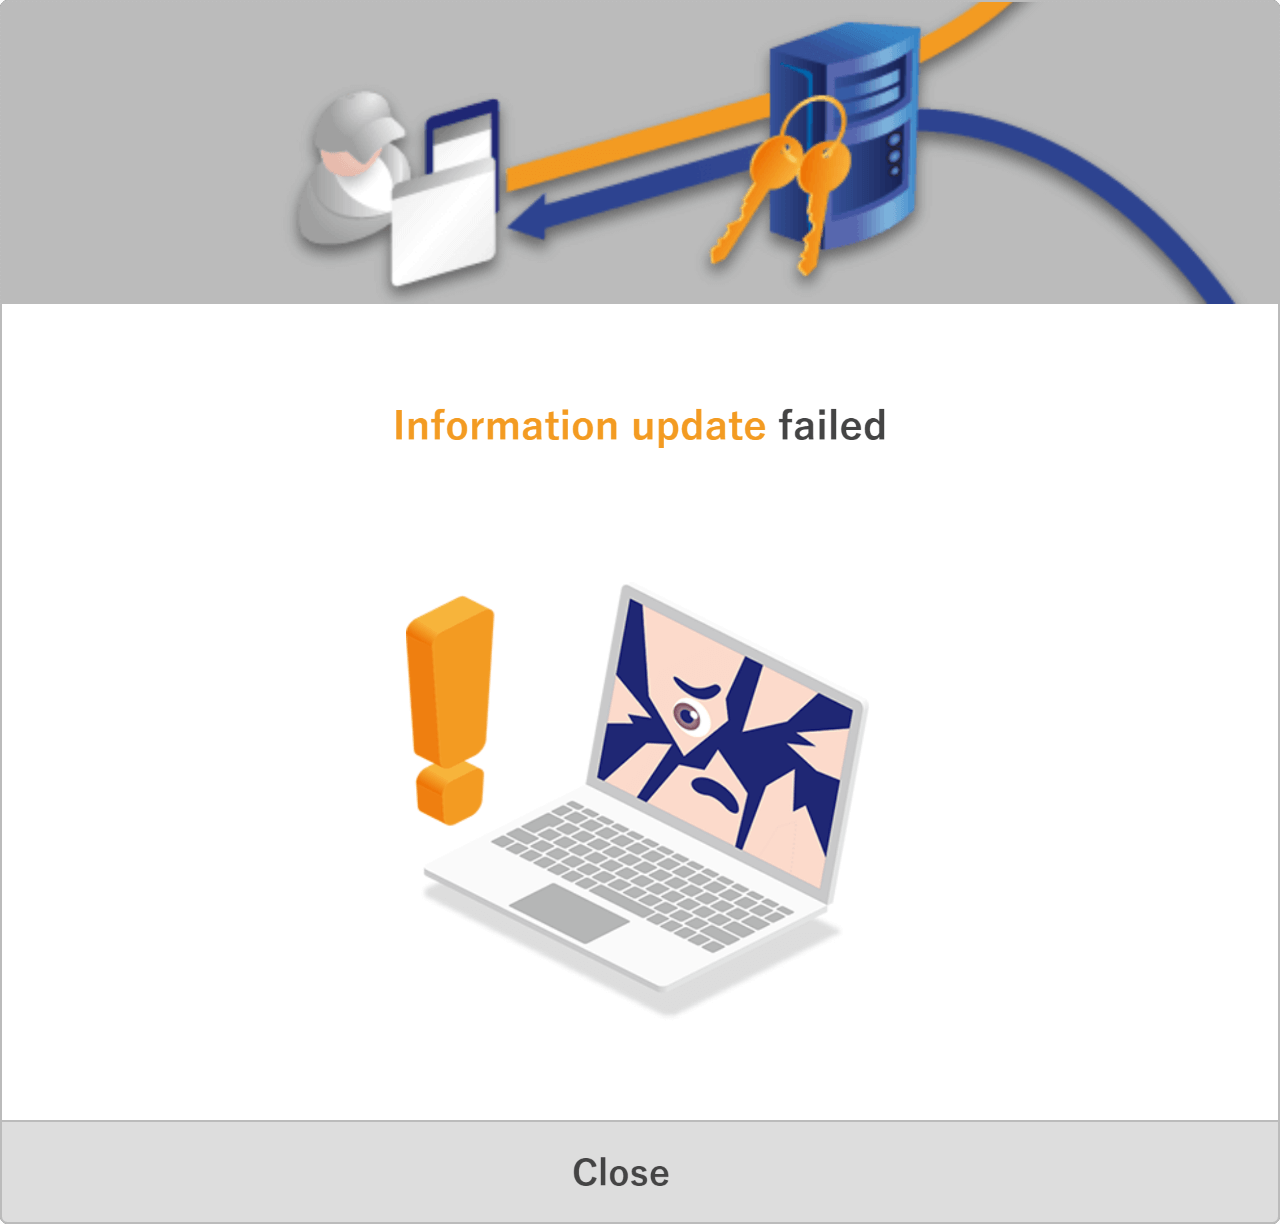 Information update failed